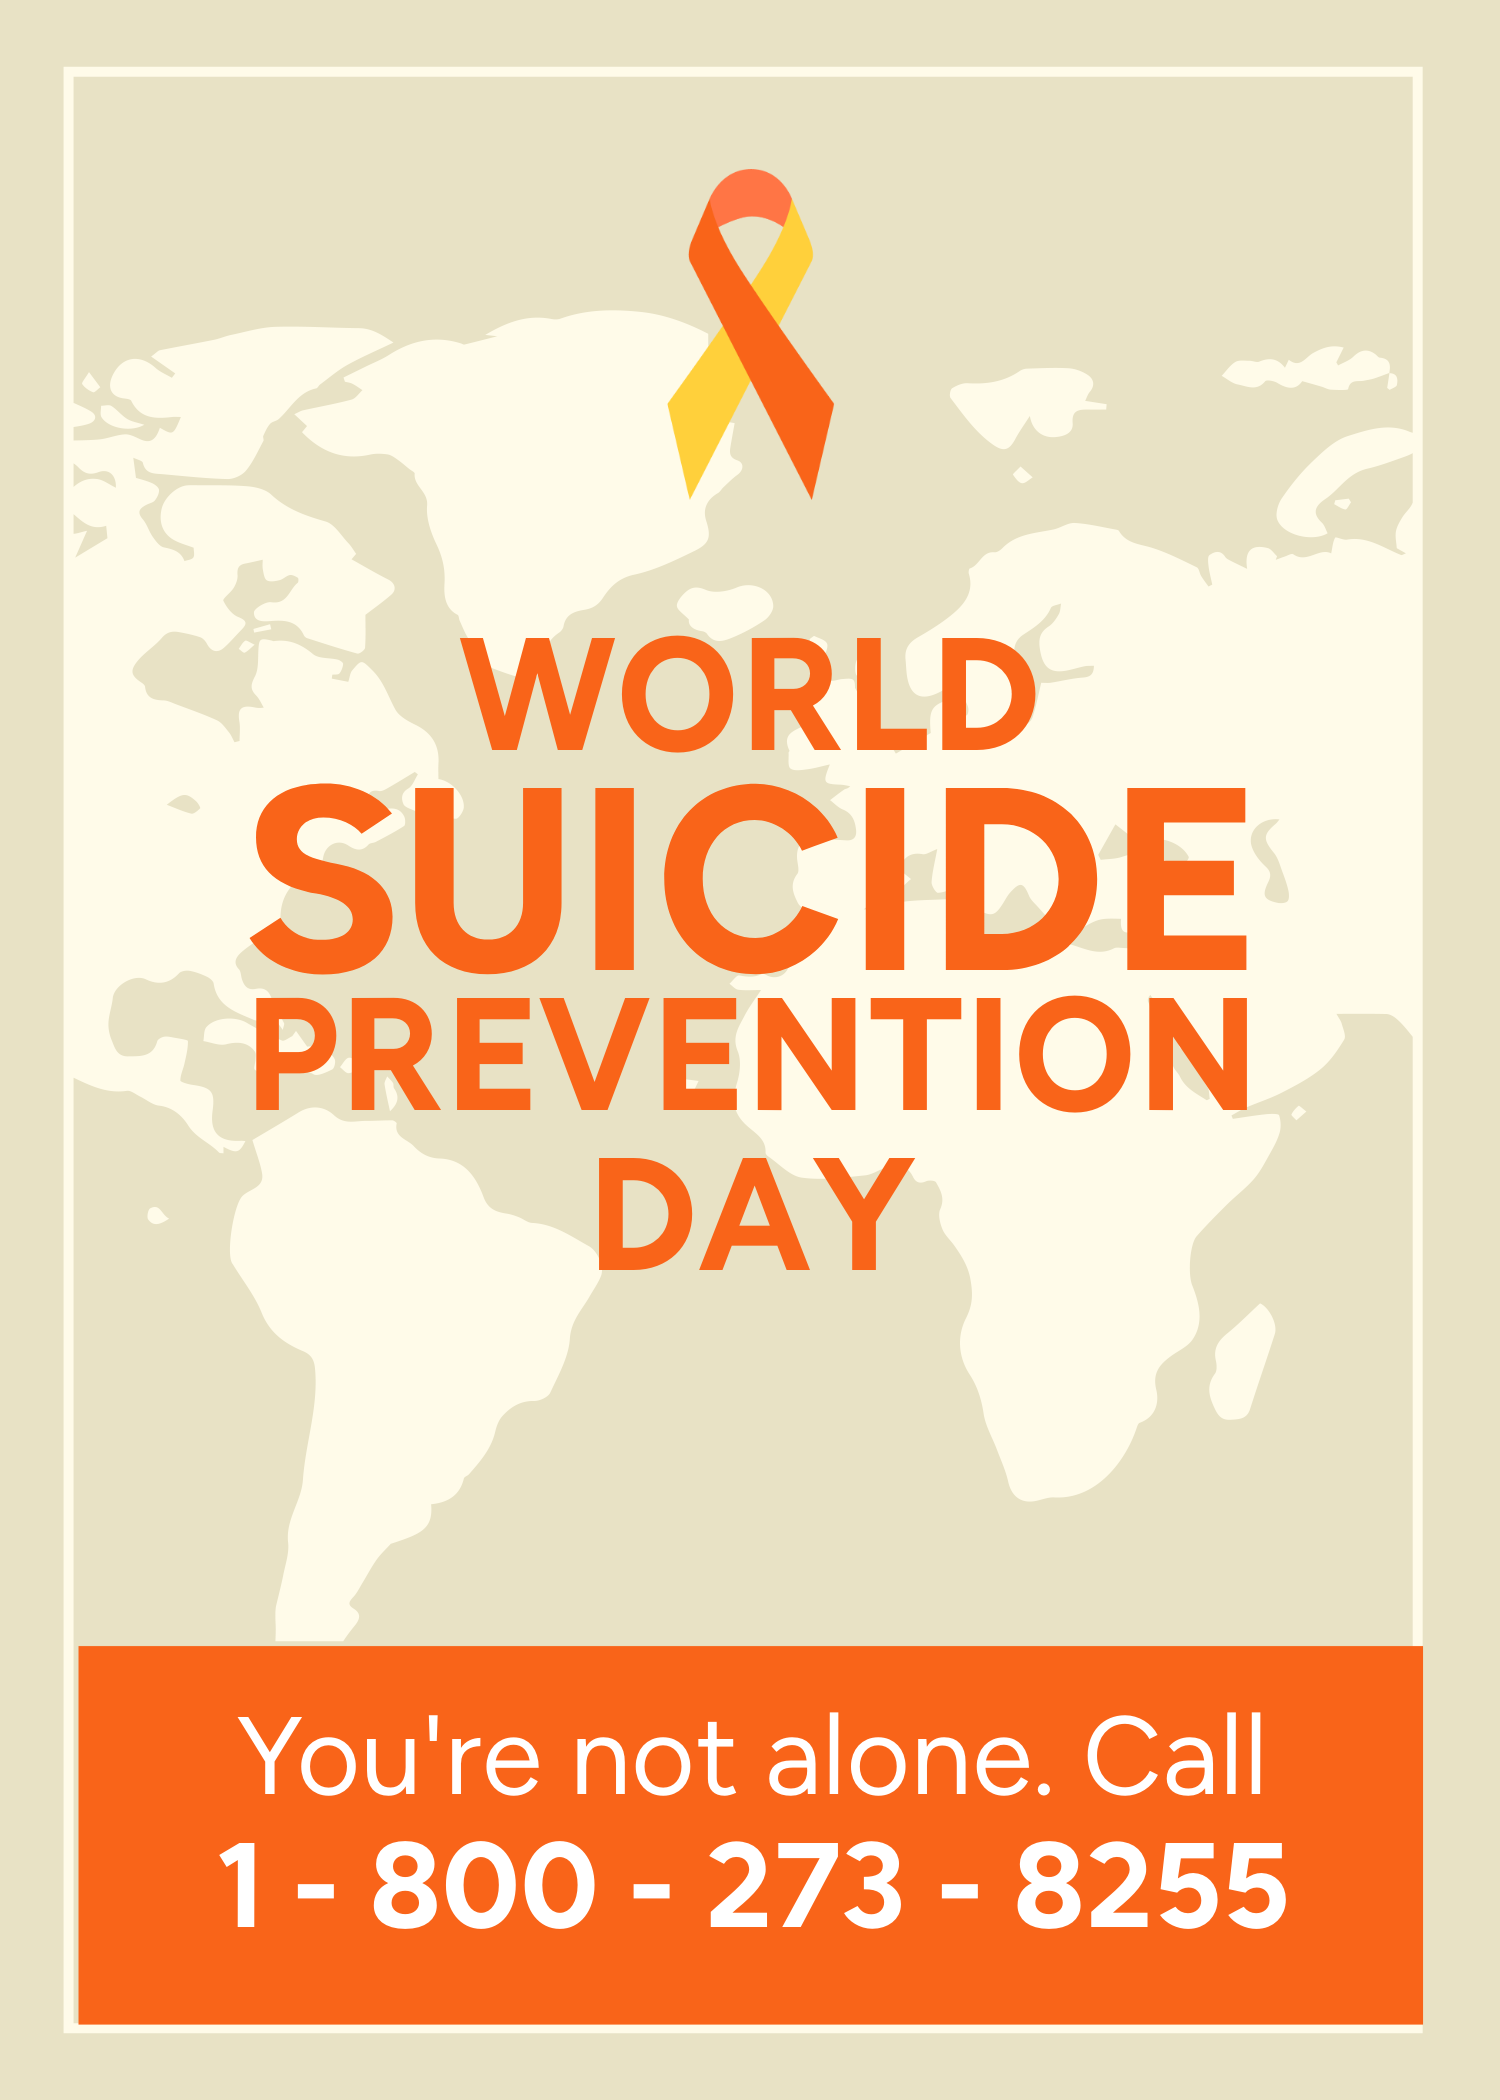 World Suicide Prevention Day Greeting Card Template | Template.net